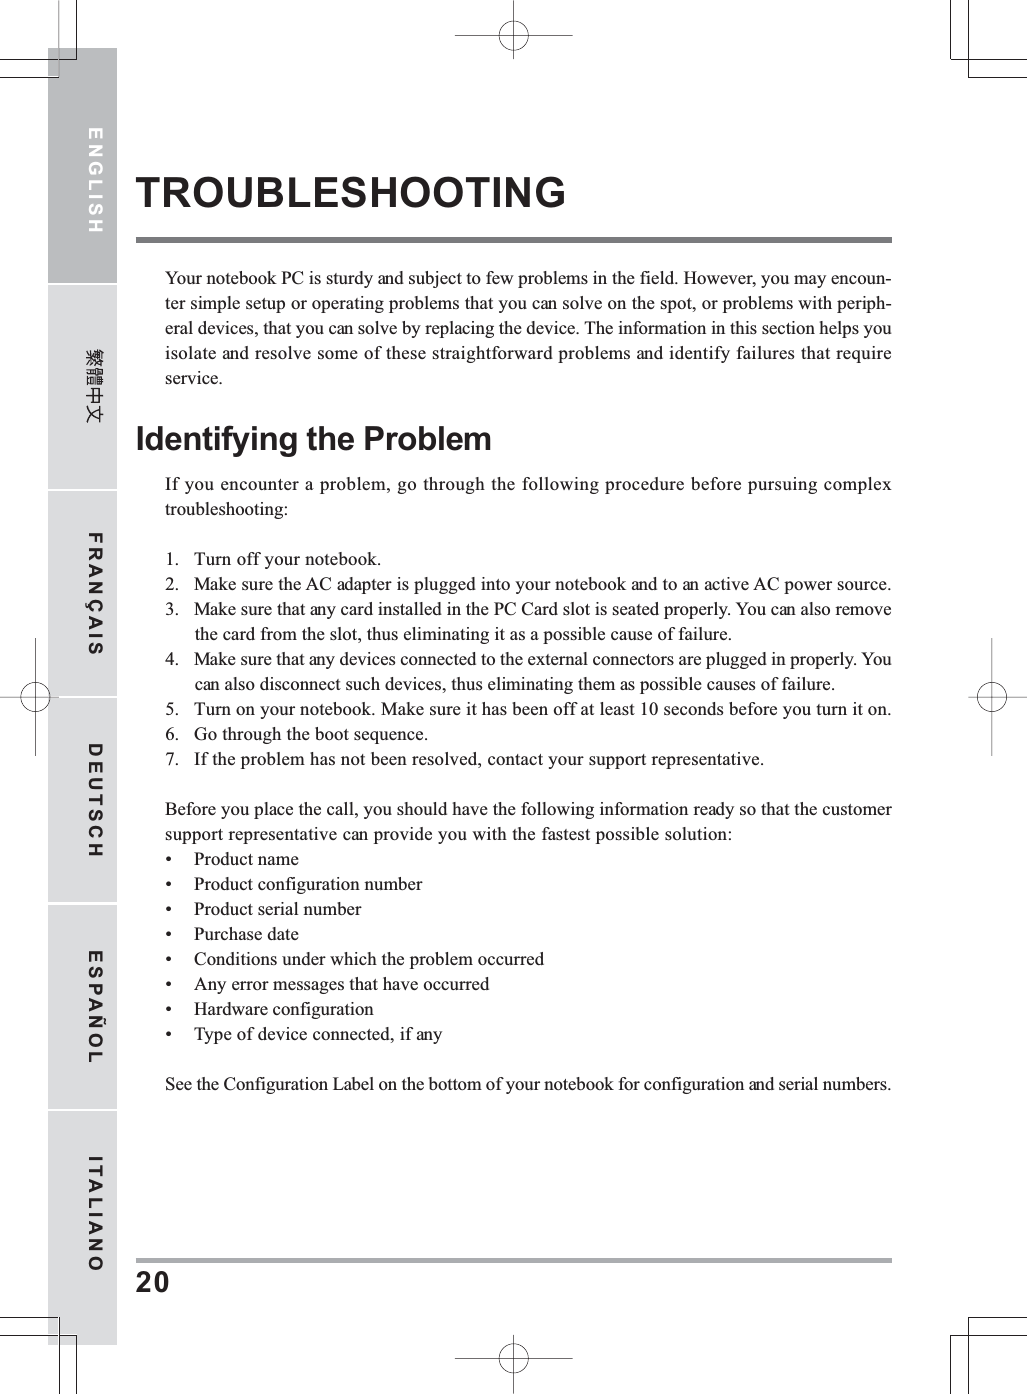 ENGLISH FRANÇAIS DEUTSCH ESPAÑOL ITALIANO20TROUBLESHOOTINGYour notebook PC is sturdy and subject to few problems in the field. However, you may encoun-ter simple setup or operating problems that you can solve on the spot, or problems with periph-eral devices, that you can solve by replacing the device. The information in this section helps youisolate and resolve some of these straightforward problems and identify failures that requireservice.Identifying the ProblemIf you encounter a problem, go through the following procedure before pursuing complextroubleshooting:1. Turn off your notebook.2. Make sure the AC adapter is plugged into your notebook and to an active AC power source.3. Make sure that any card installed in the PC Card slot is seated properly. You can also removethe card from the slot, thus eliminating it as a possible cause of failure.4. Make sure that any devices connected to the external connectors are plugged in properly. Youcan also disconnect such devices, thus eliminating them as possible causes of failure.5. Turn on your notebook. Make sure it has been off at least 10 seconds before you turn it on.6. Go through the boot sequence.7. If the problem has not been resolved, contact your support representative.Before you place the call, you should have the following information ready so that the customersupport representative can provide you with the fastest possible solution:• Product name• Product configuration number• Product serial number• Purchase date• Conditions under which the problem occurred• Any error messages that have occurred• Hardware configuration• Type of device connected, if anySee the Configuration Label on the bottom of your notebook for configuration and serial numbers.